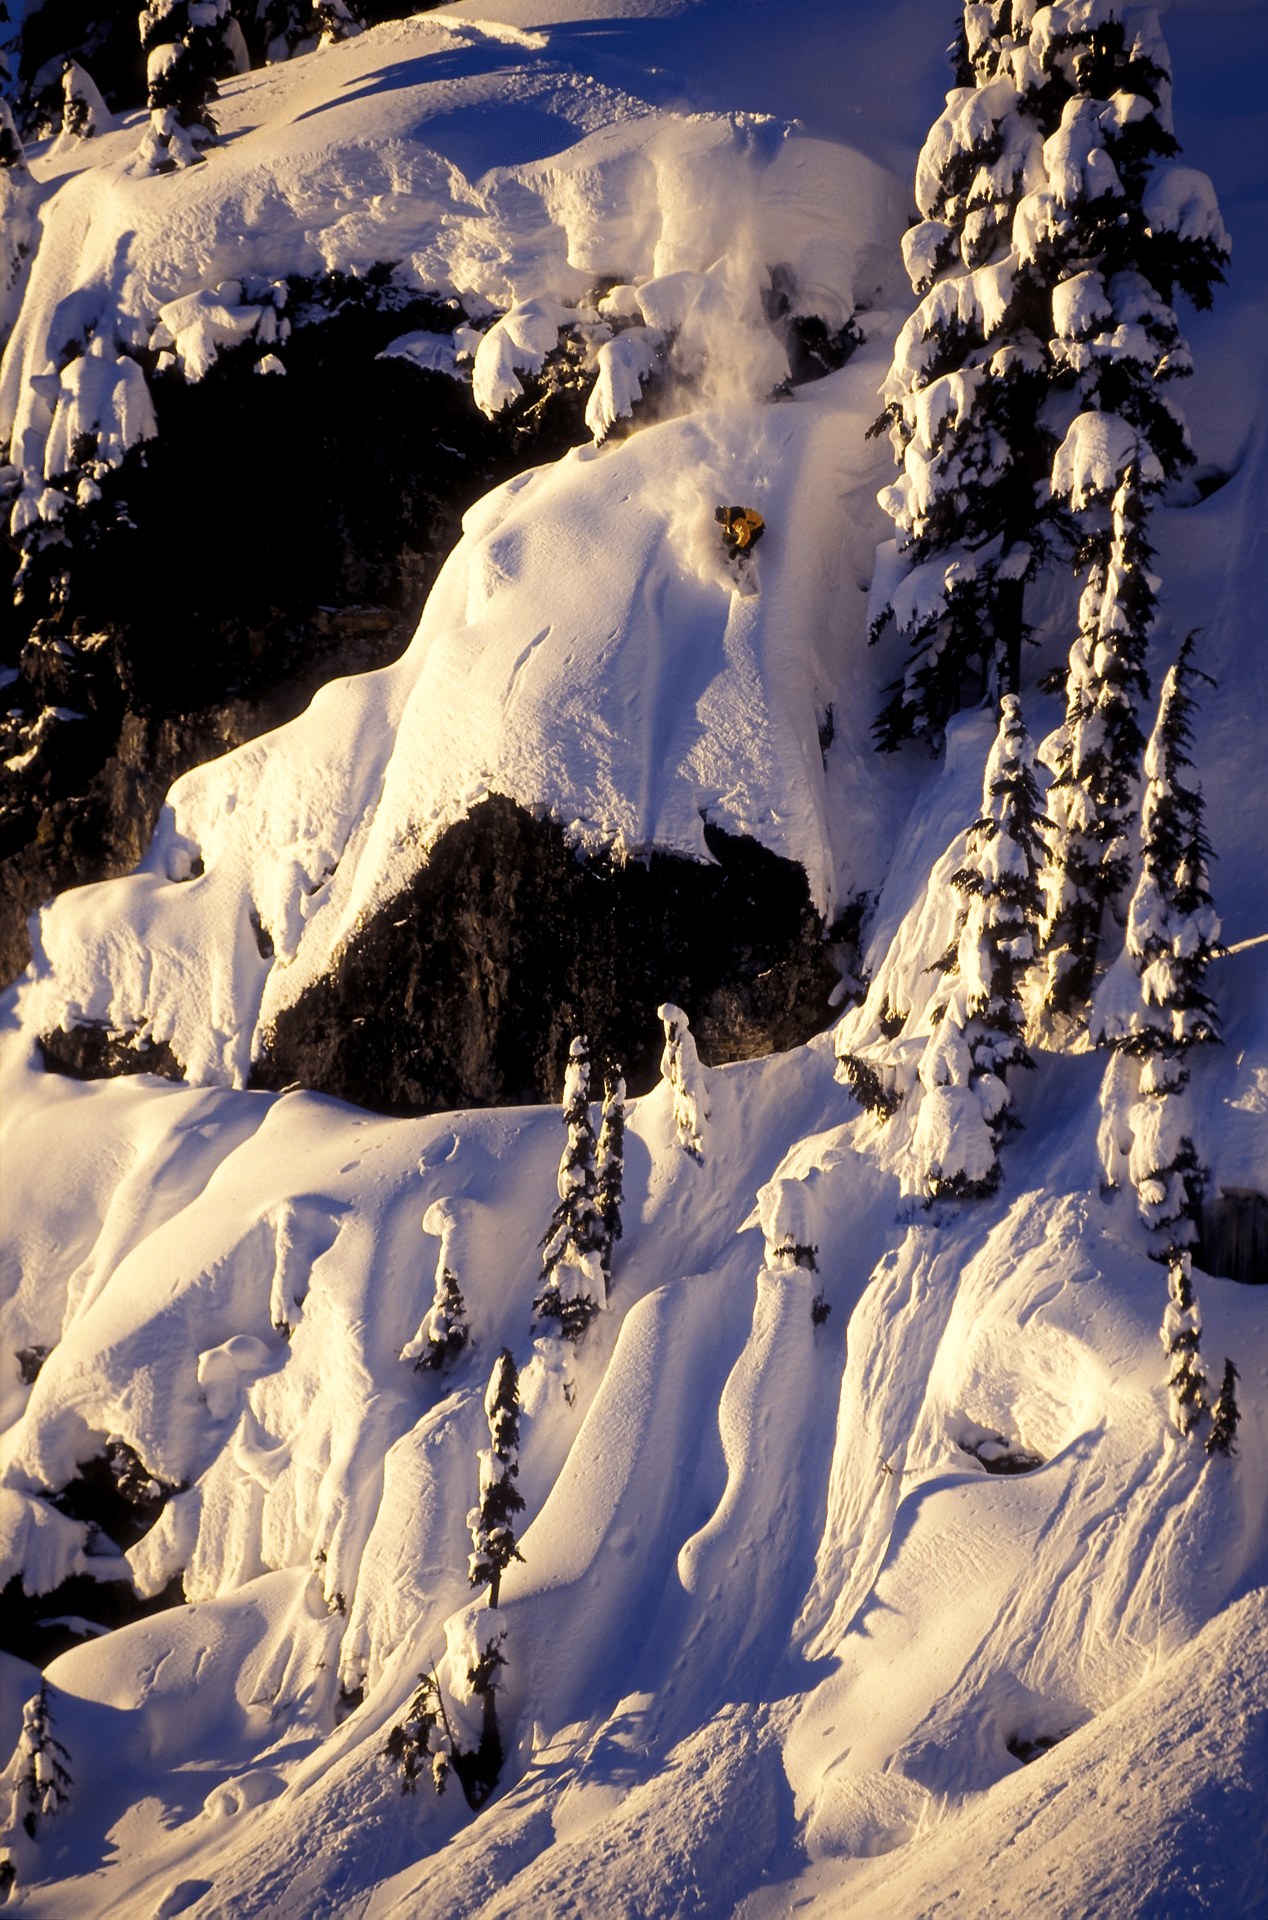 Sean Johnson threads the needle in the Whistler Backcountry